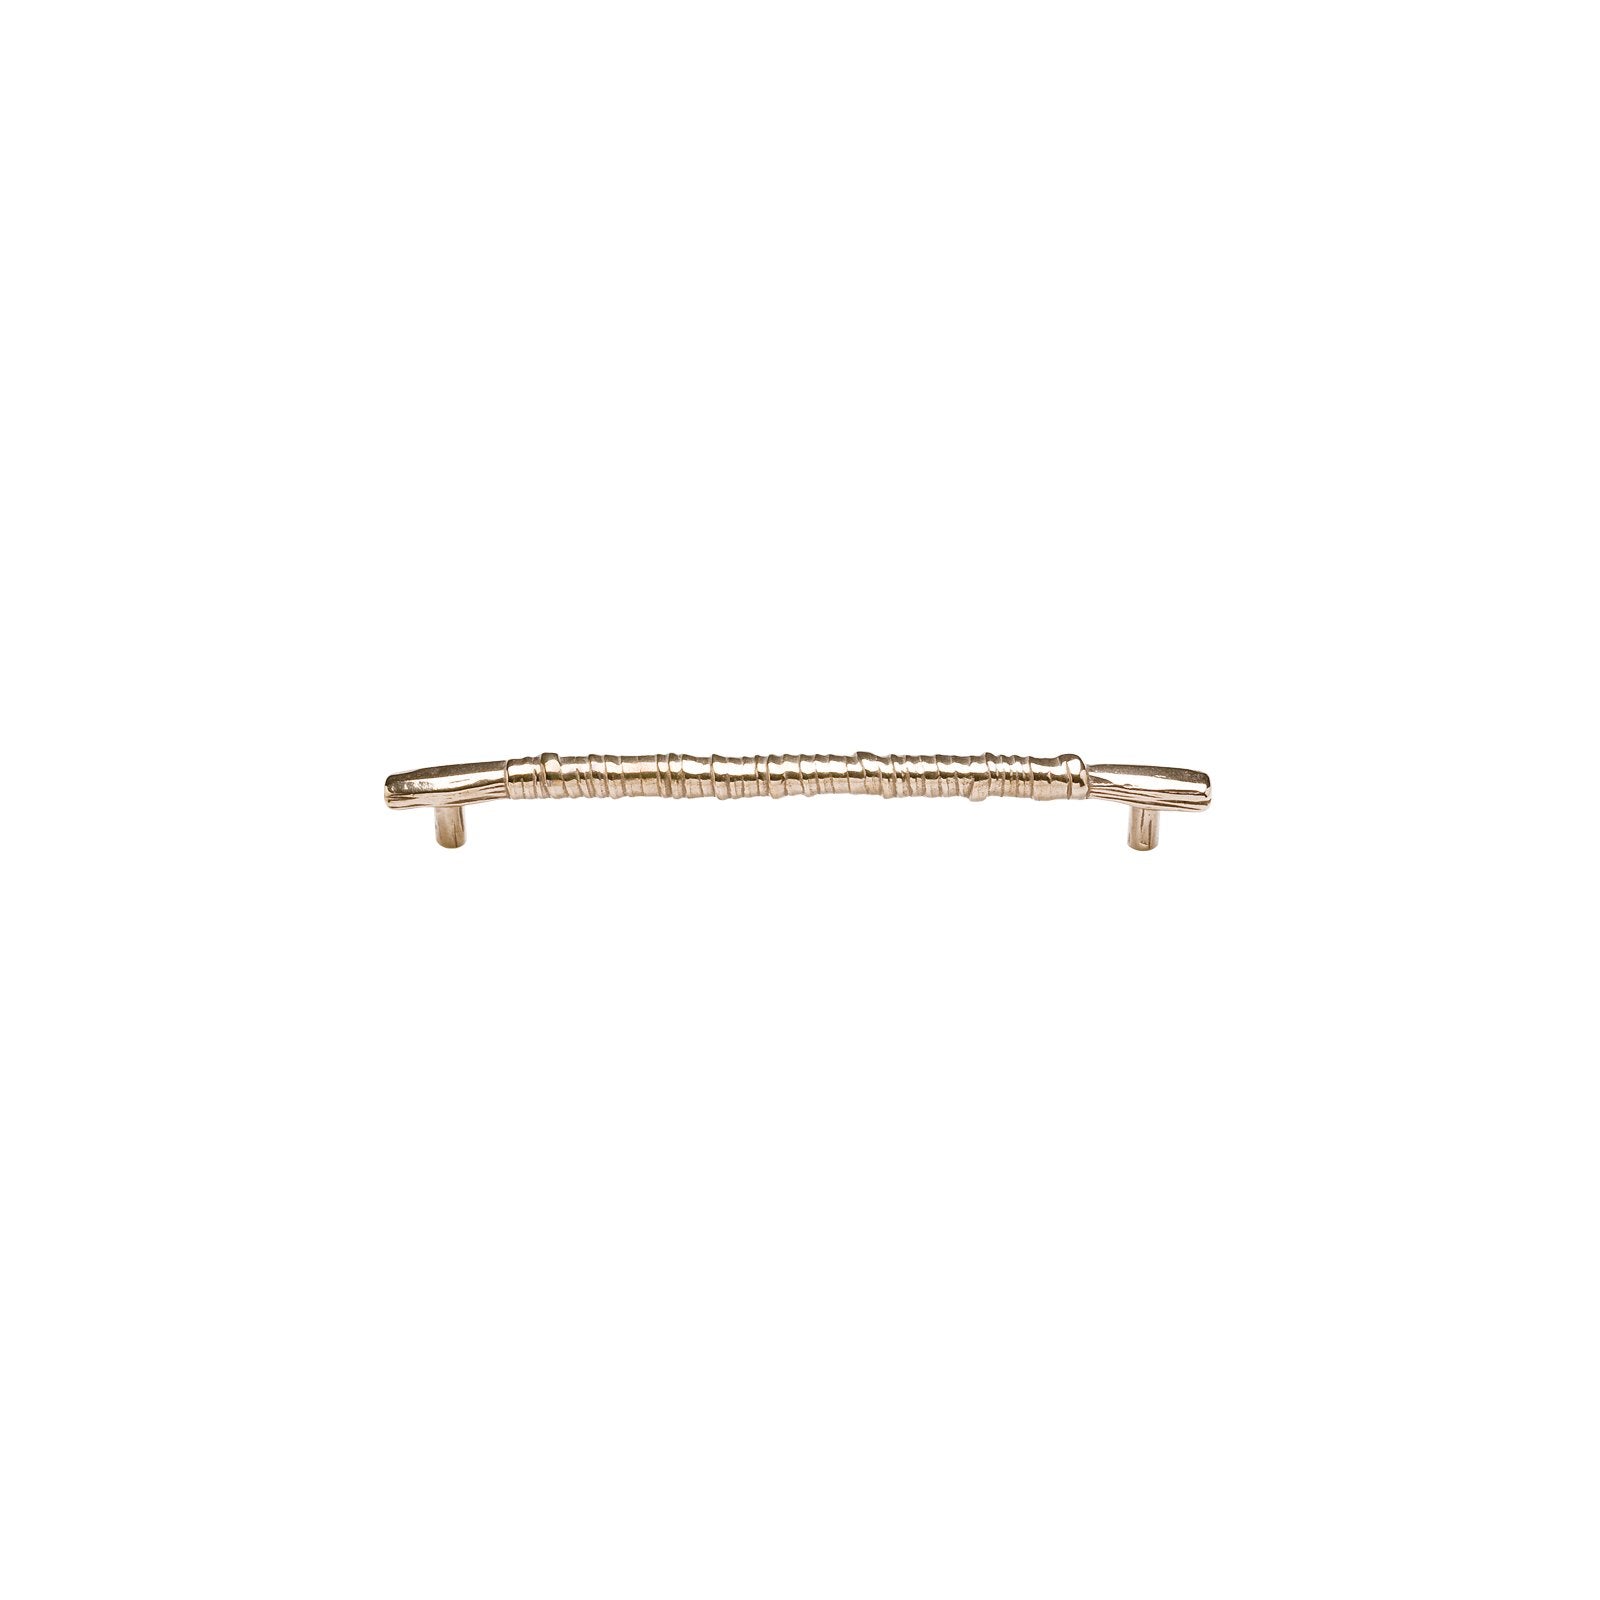 Rocky Mountain Hardware CK362 - 10 1/2" C-to-C Lariat Cabinet Pull